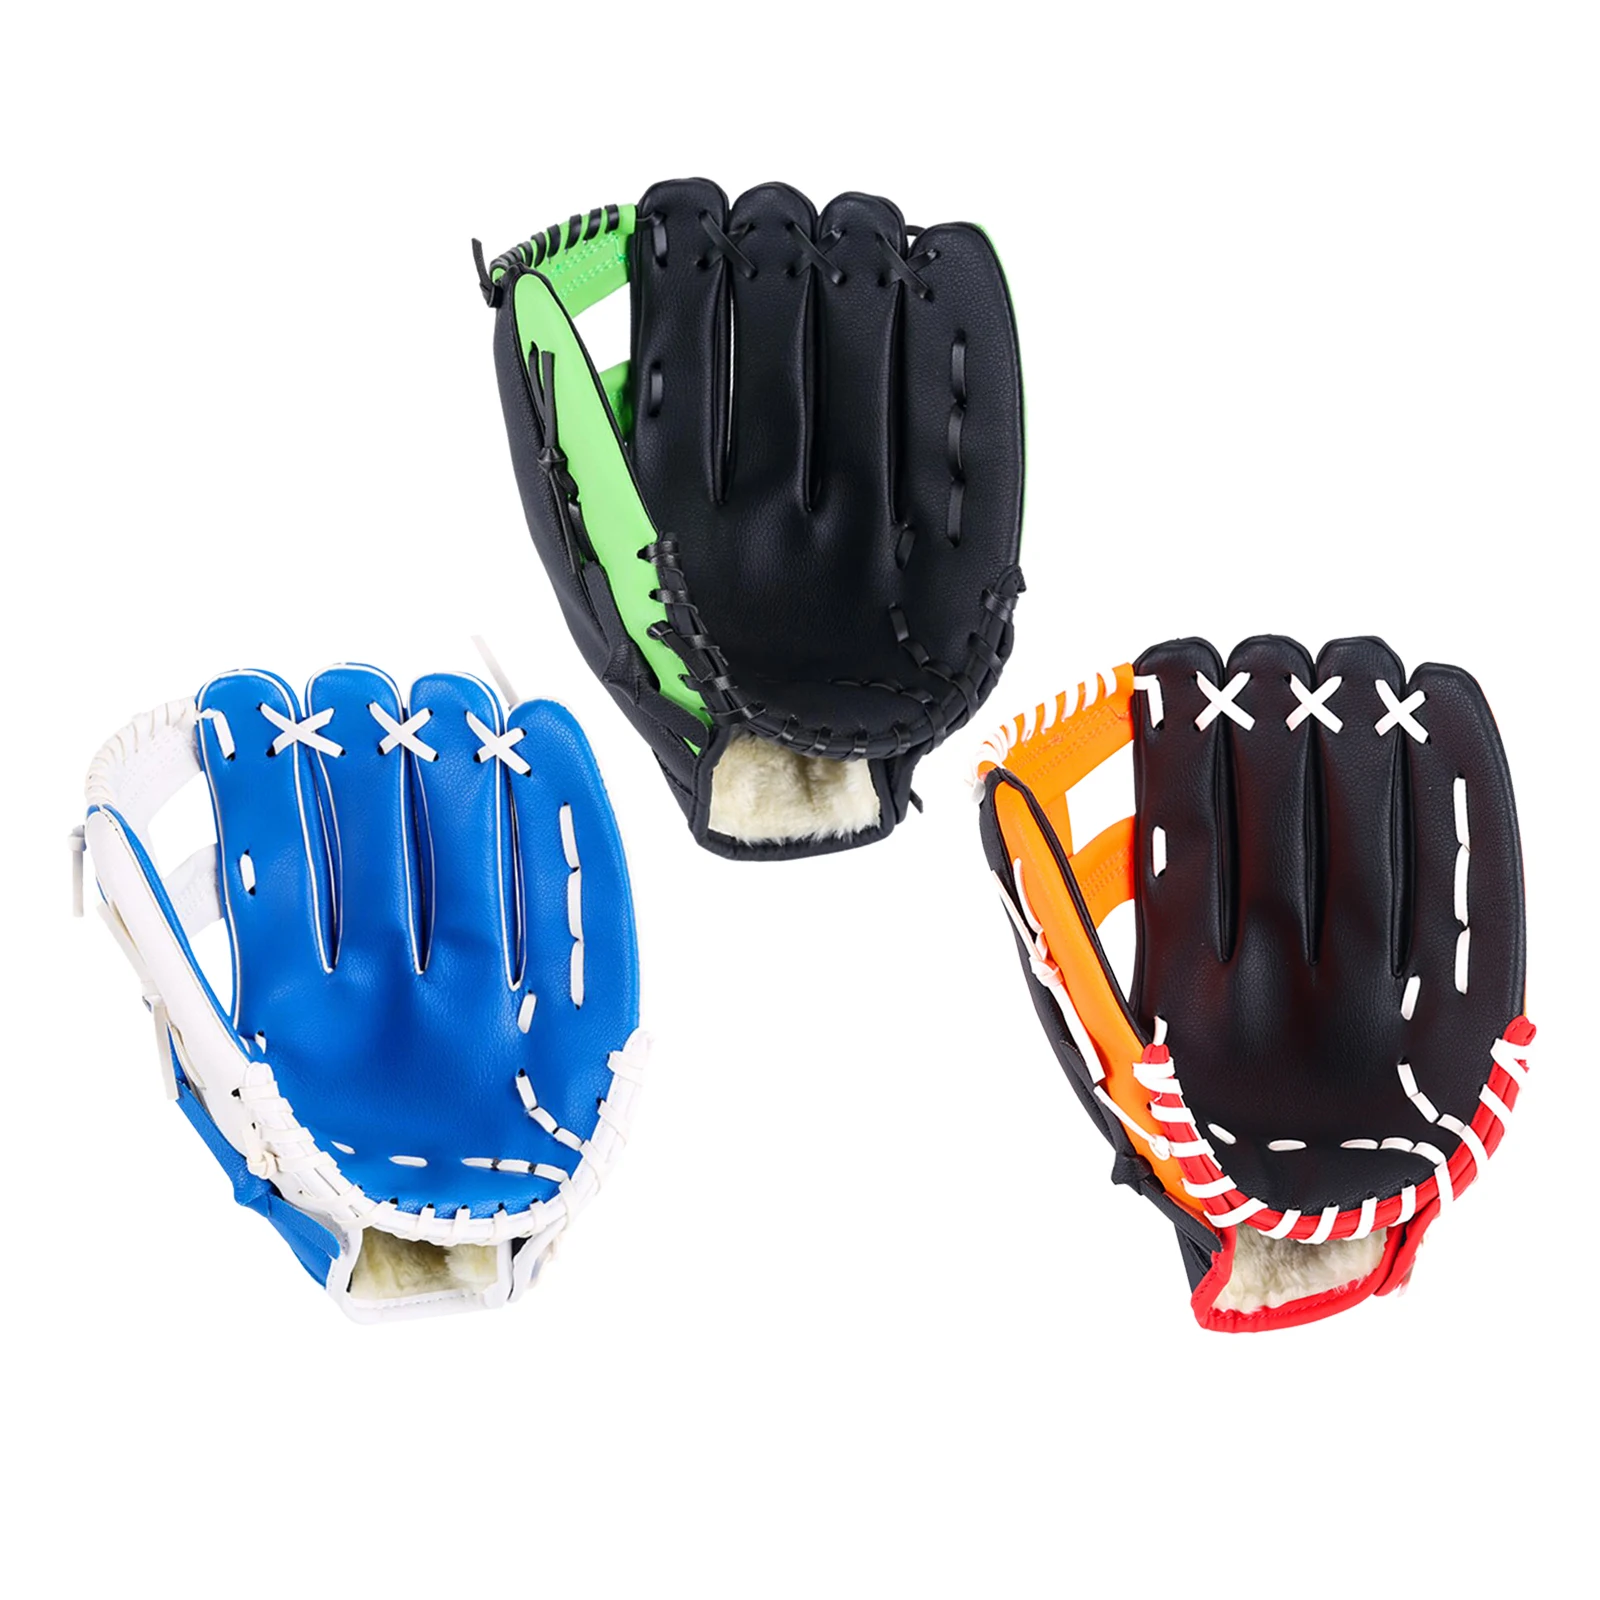 Outdoor Sports Baseball Glove Thickening Softball Batting Glove Practice Equipment Left Hand Throw for Children Youth Adults